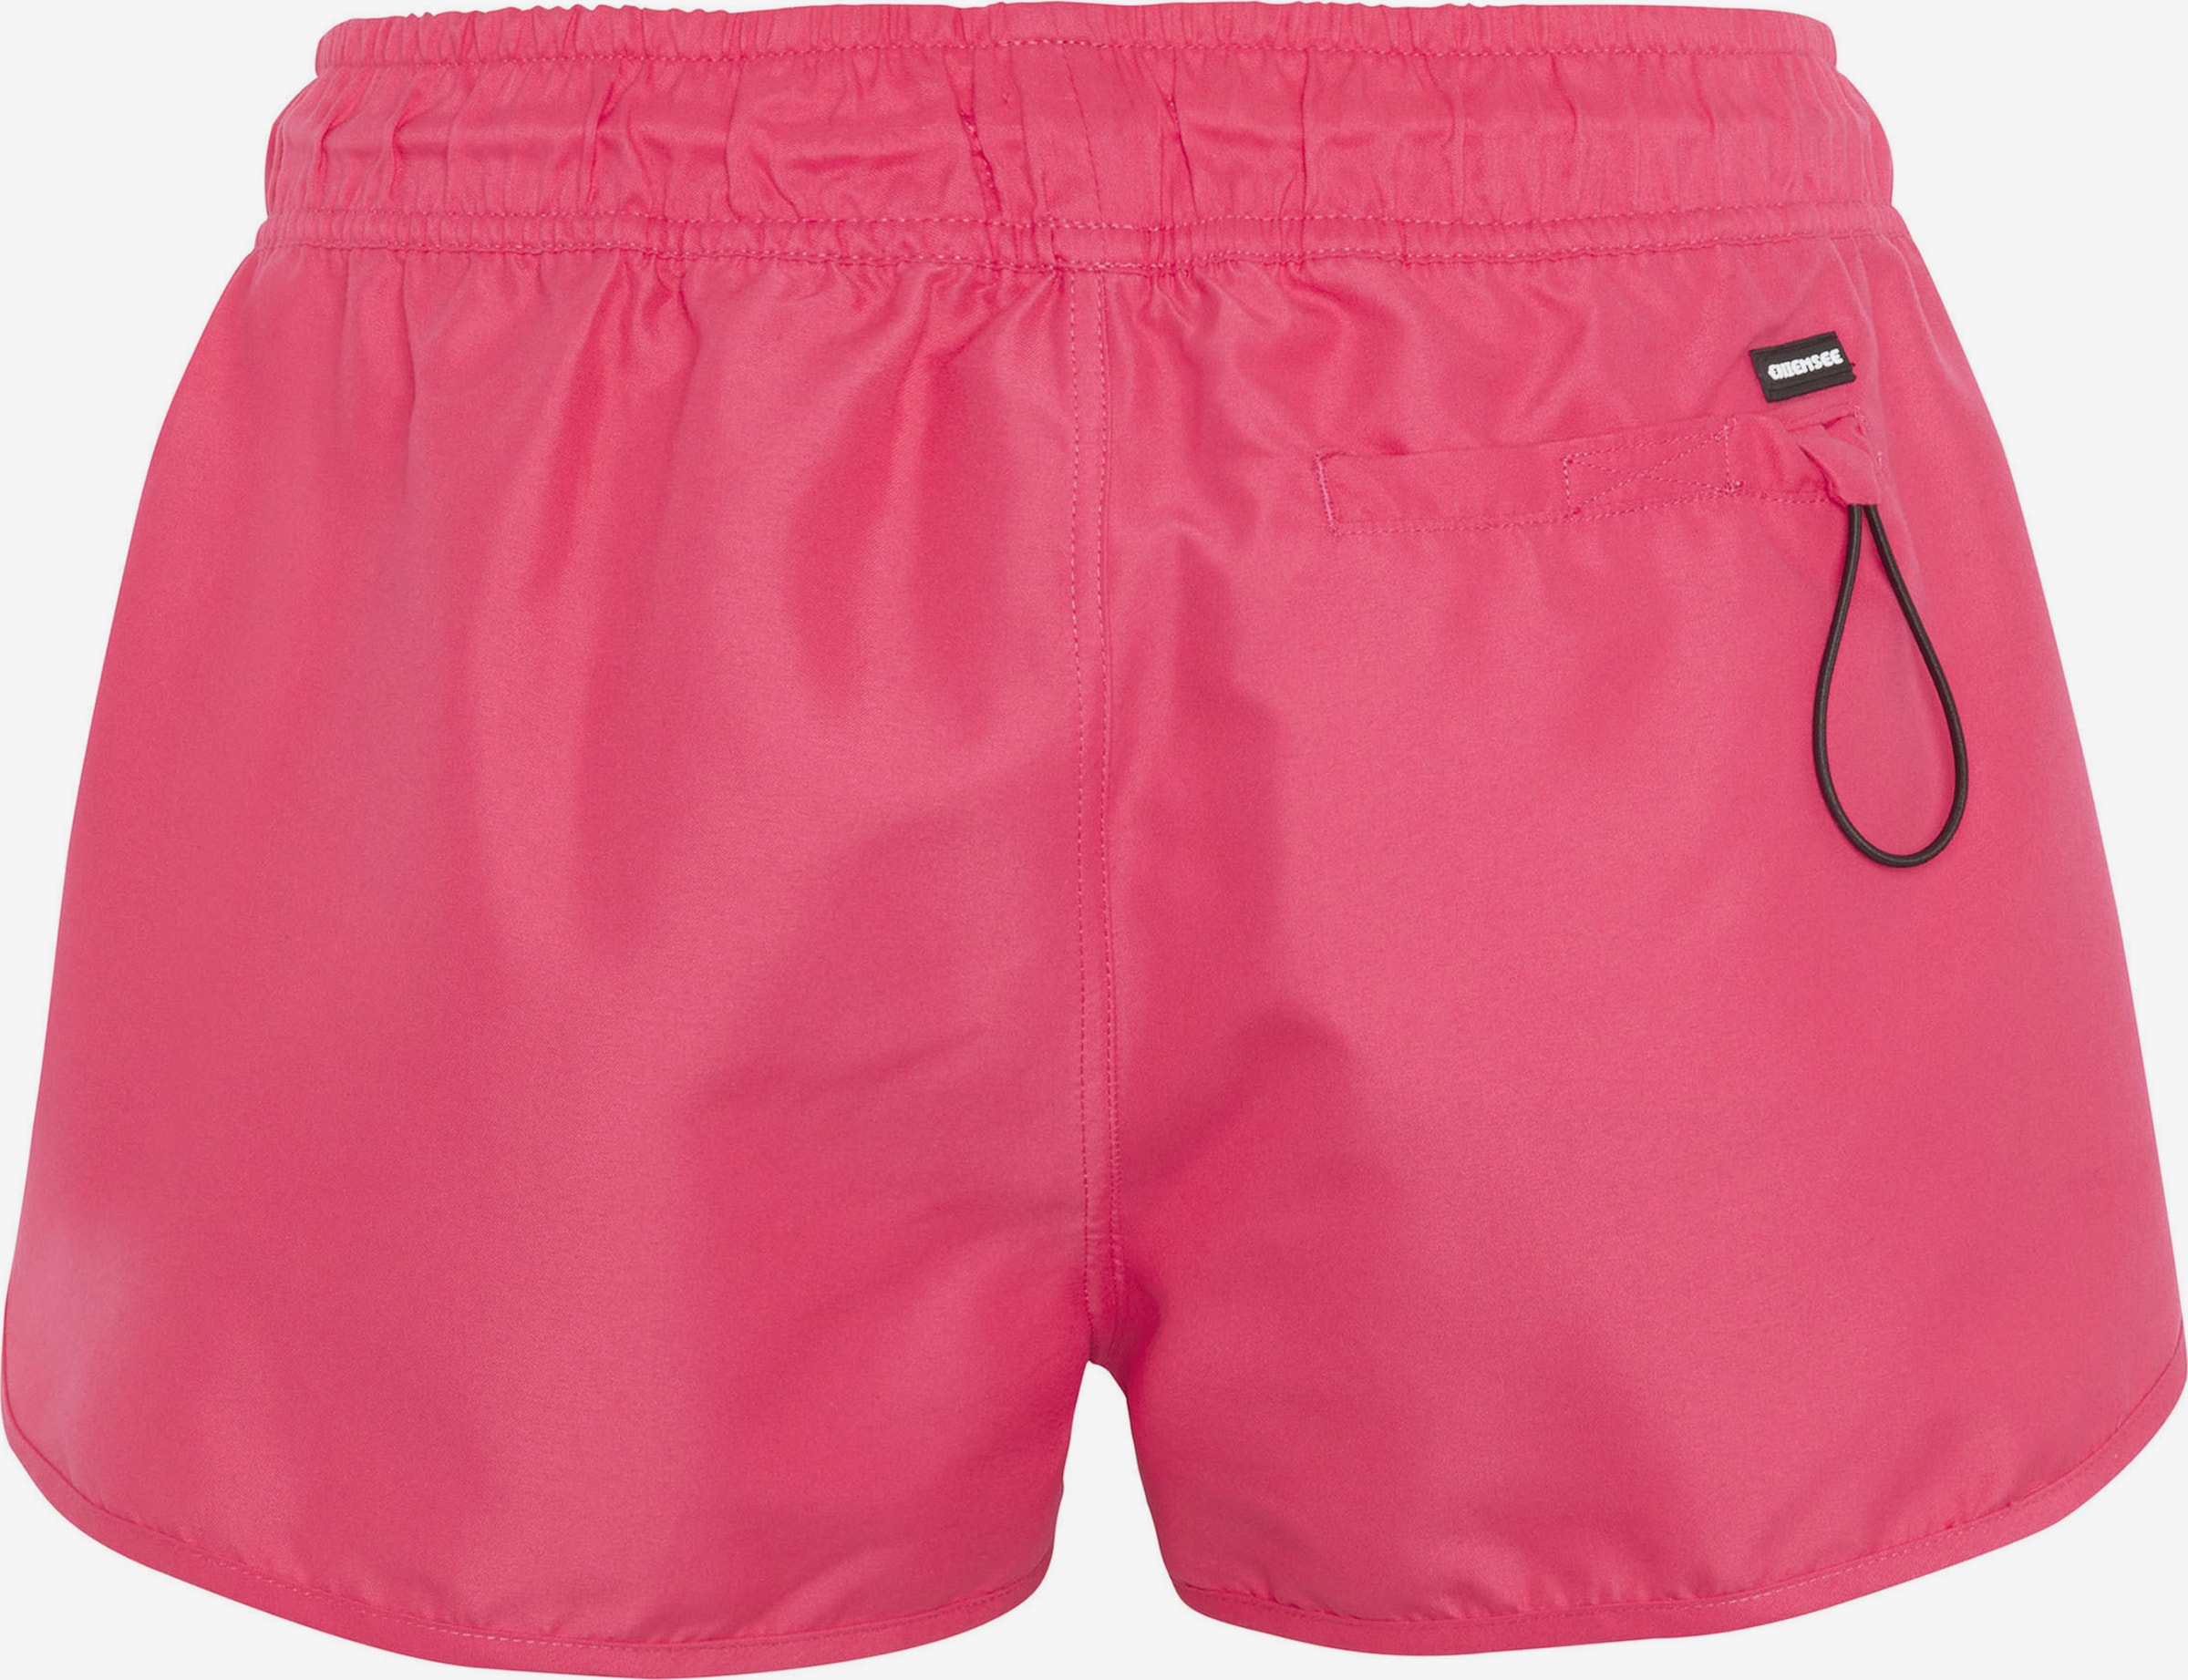 Pink Regular | ABOUT Badeshorts CHIEMSEE in YOU